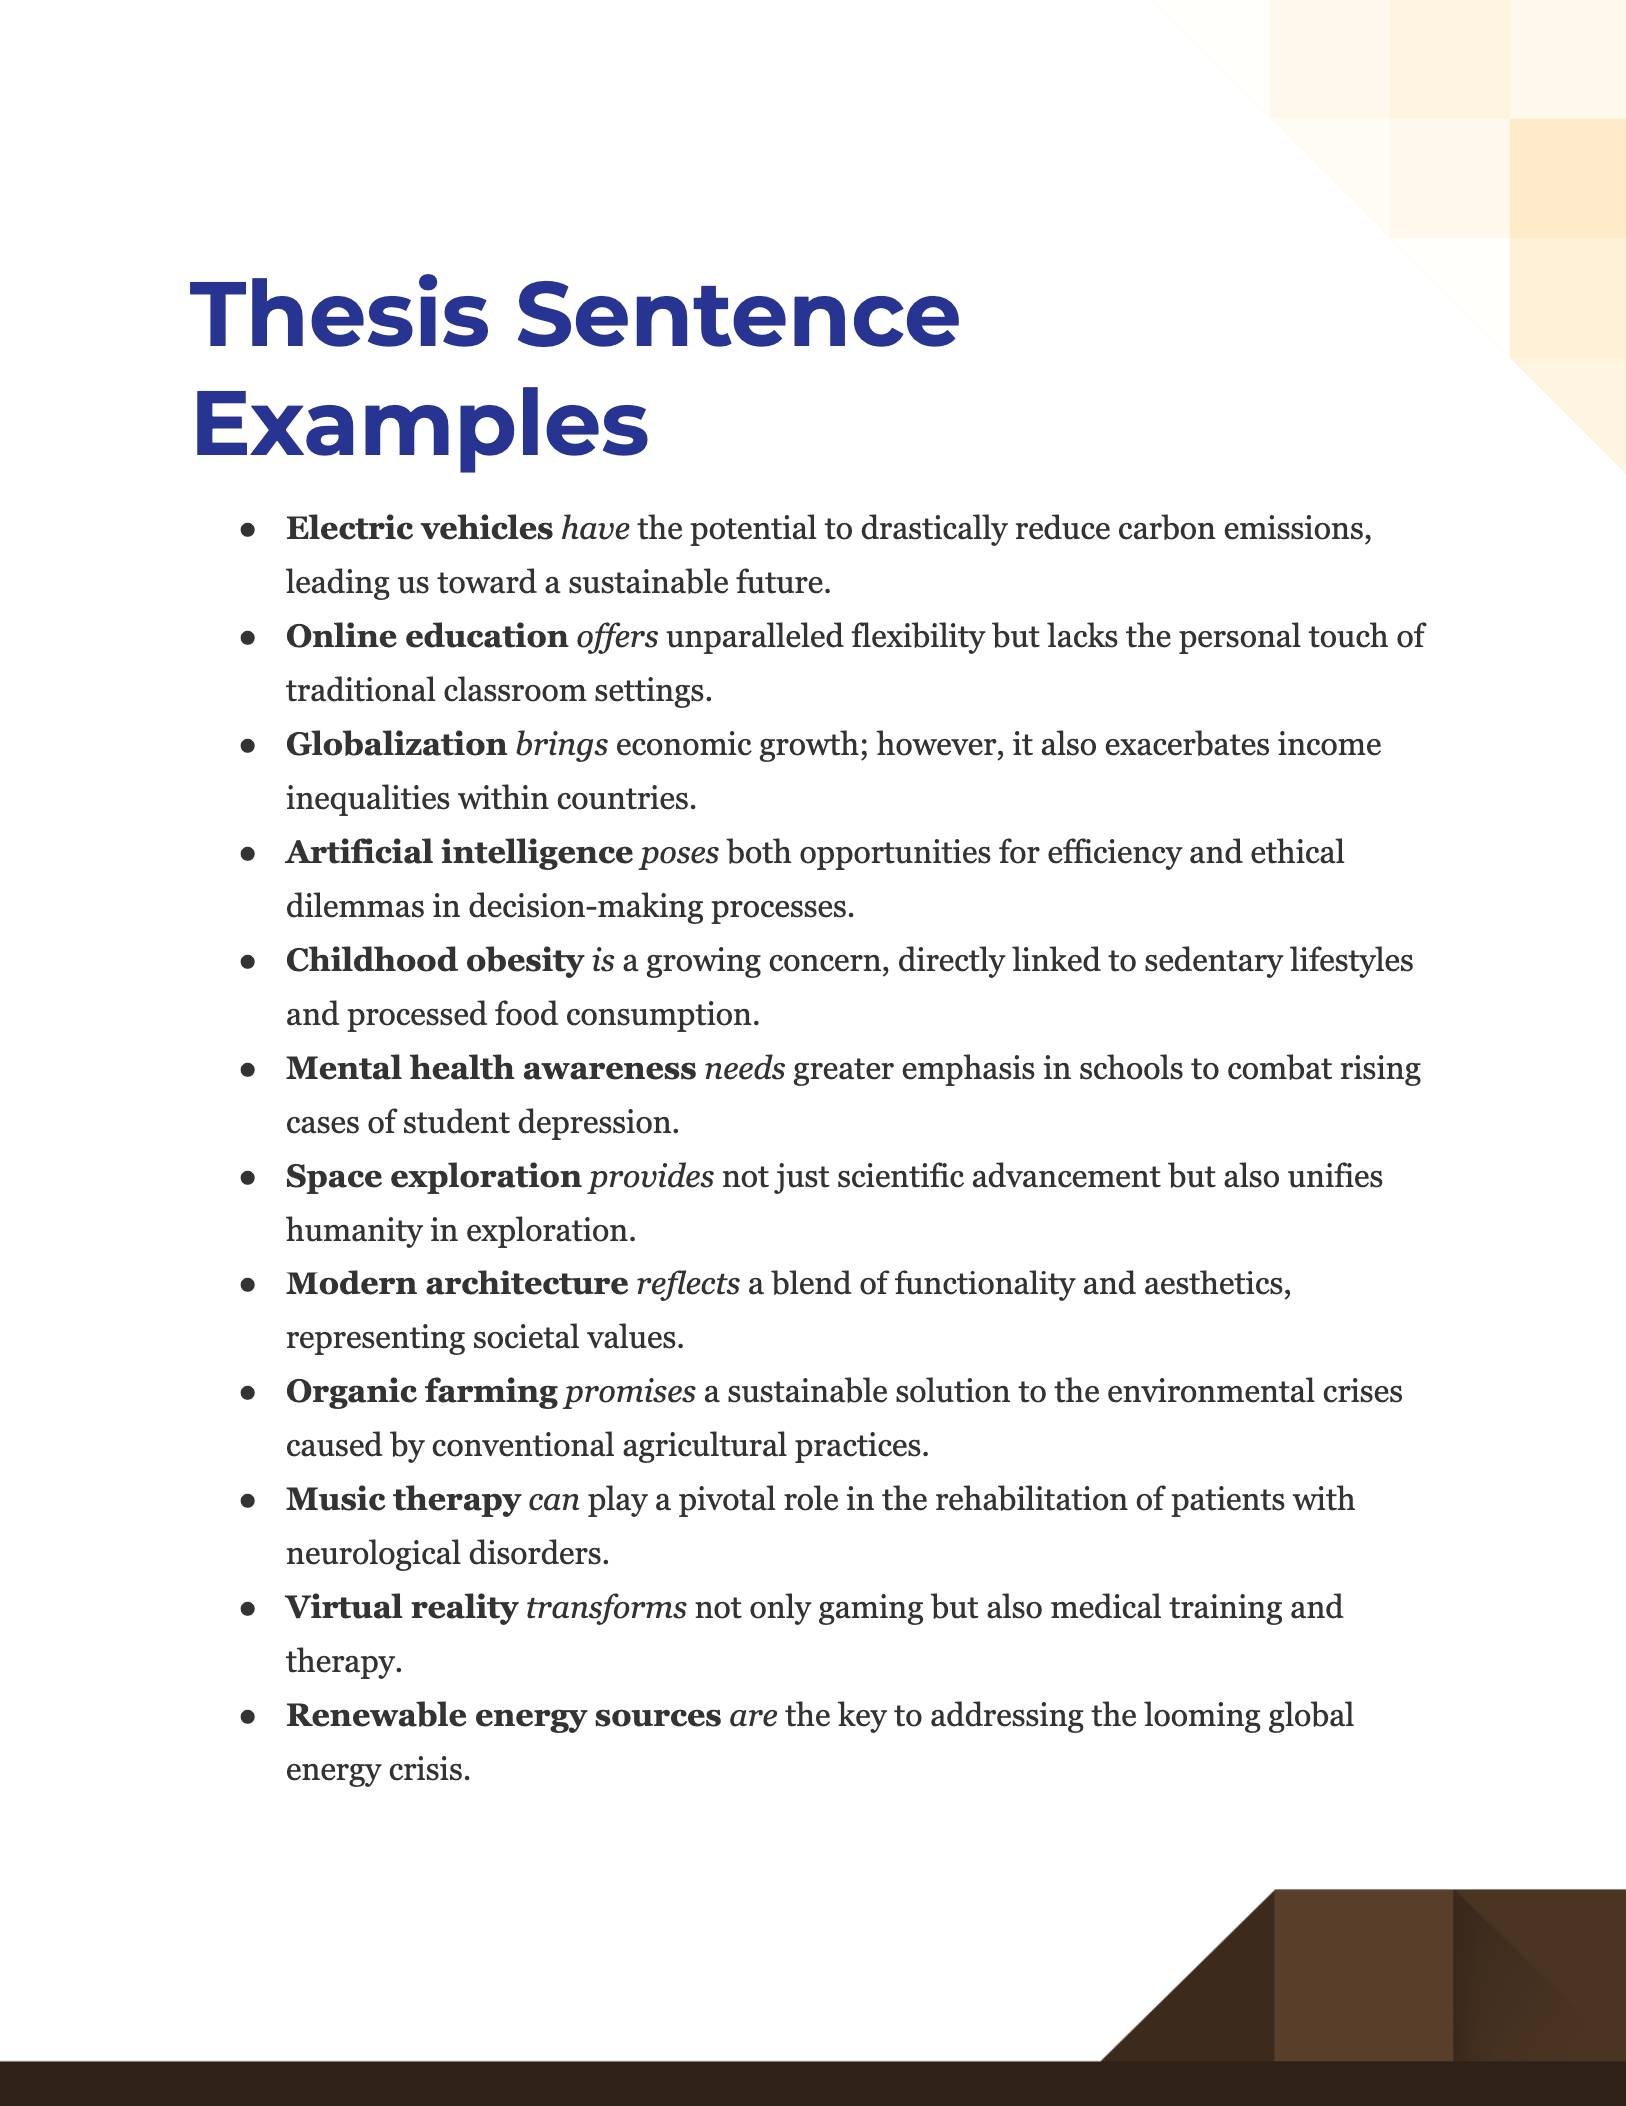 use thesis in a short sentence